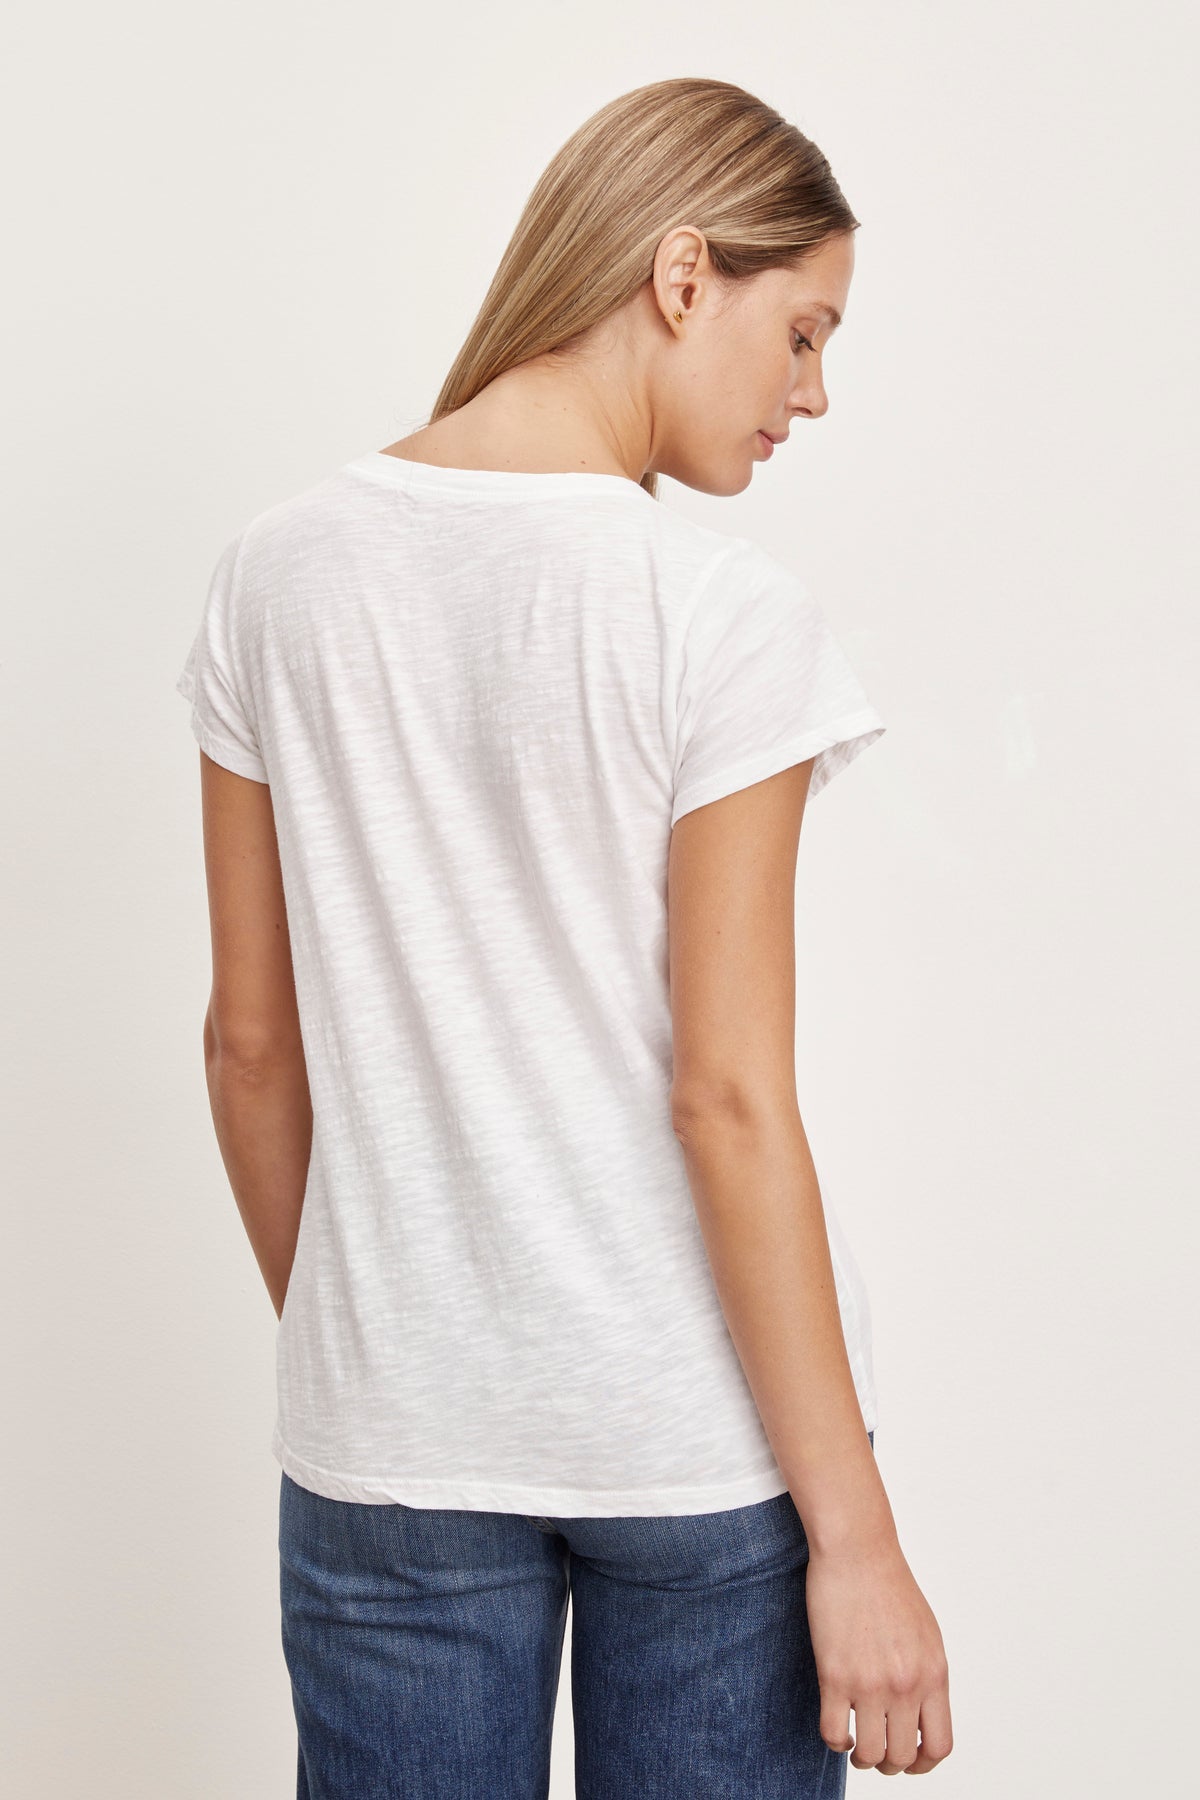 The back view of a woman wearing jeans and a Velvet by Graham & Spencer JILIAN ORIGINAL SLUB V-NECK TEE.-26839992533185